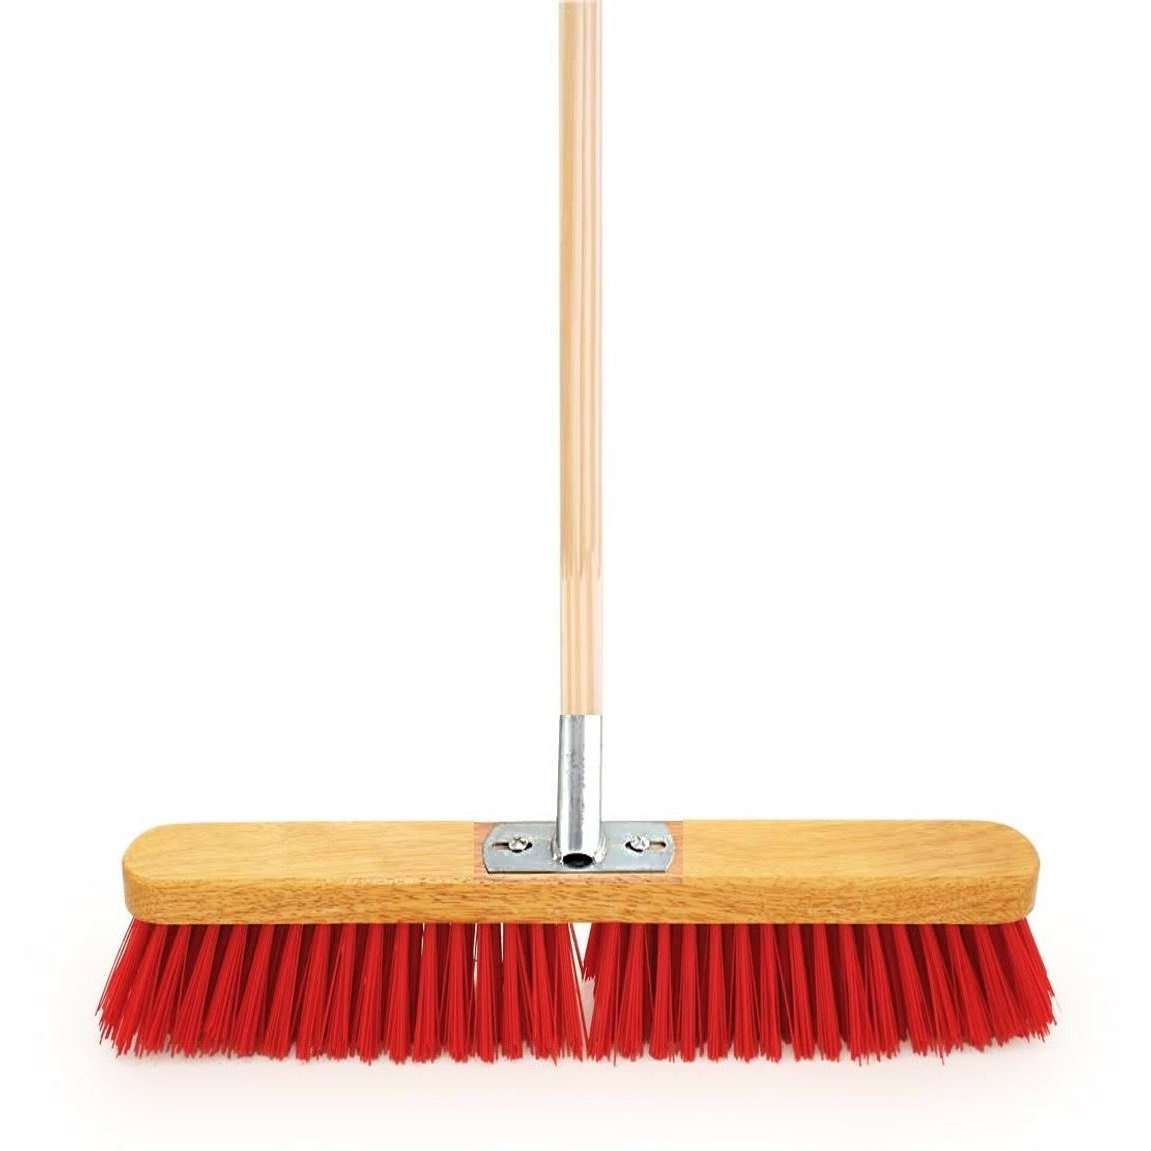 18″ PVC Heavy Duty Yard Brush with Metal Bracket and Wooden Handle